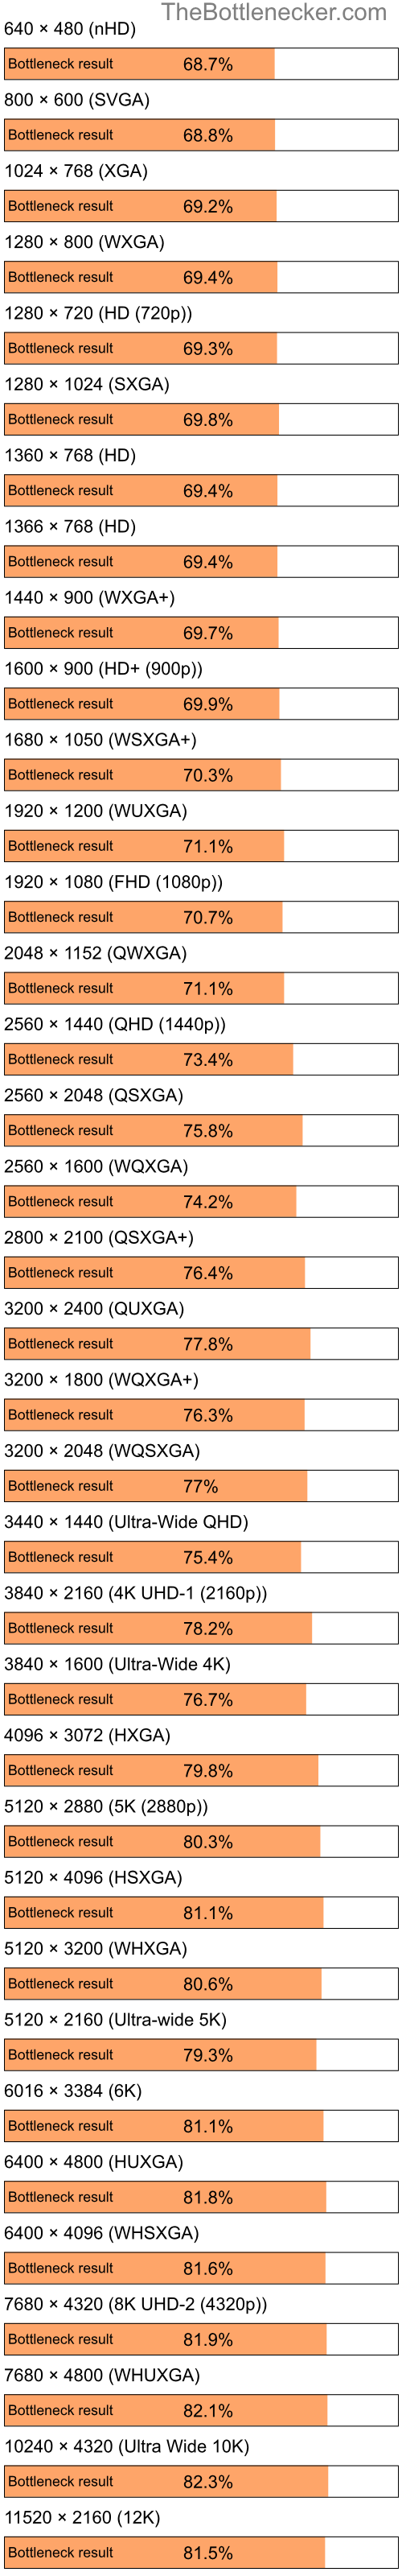 Bottleneck results by resolution for Intel Atom Z520 and AMD Radeon HD 6290 in Graphic Card Intense Tasks